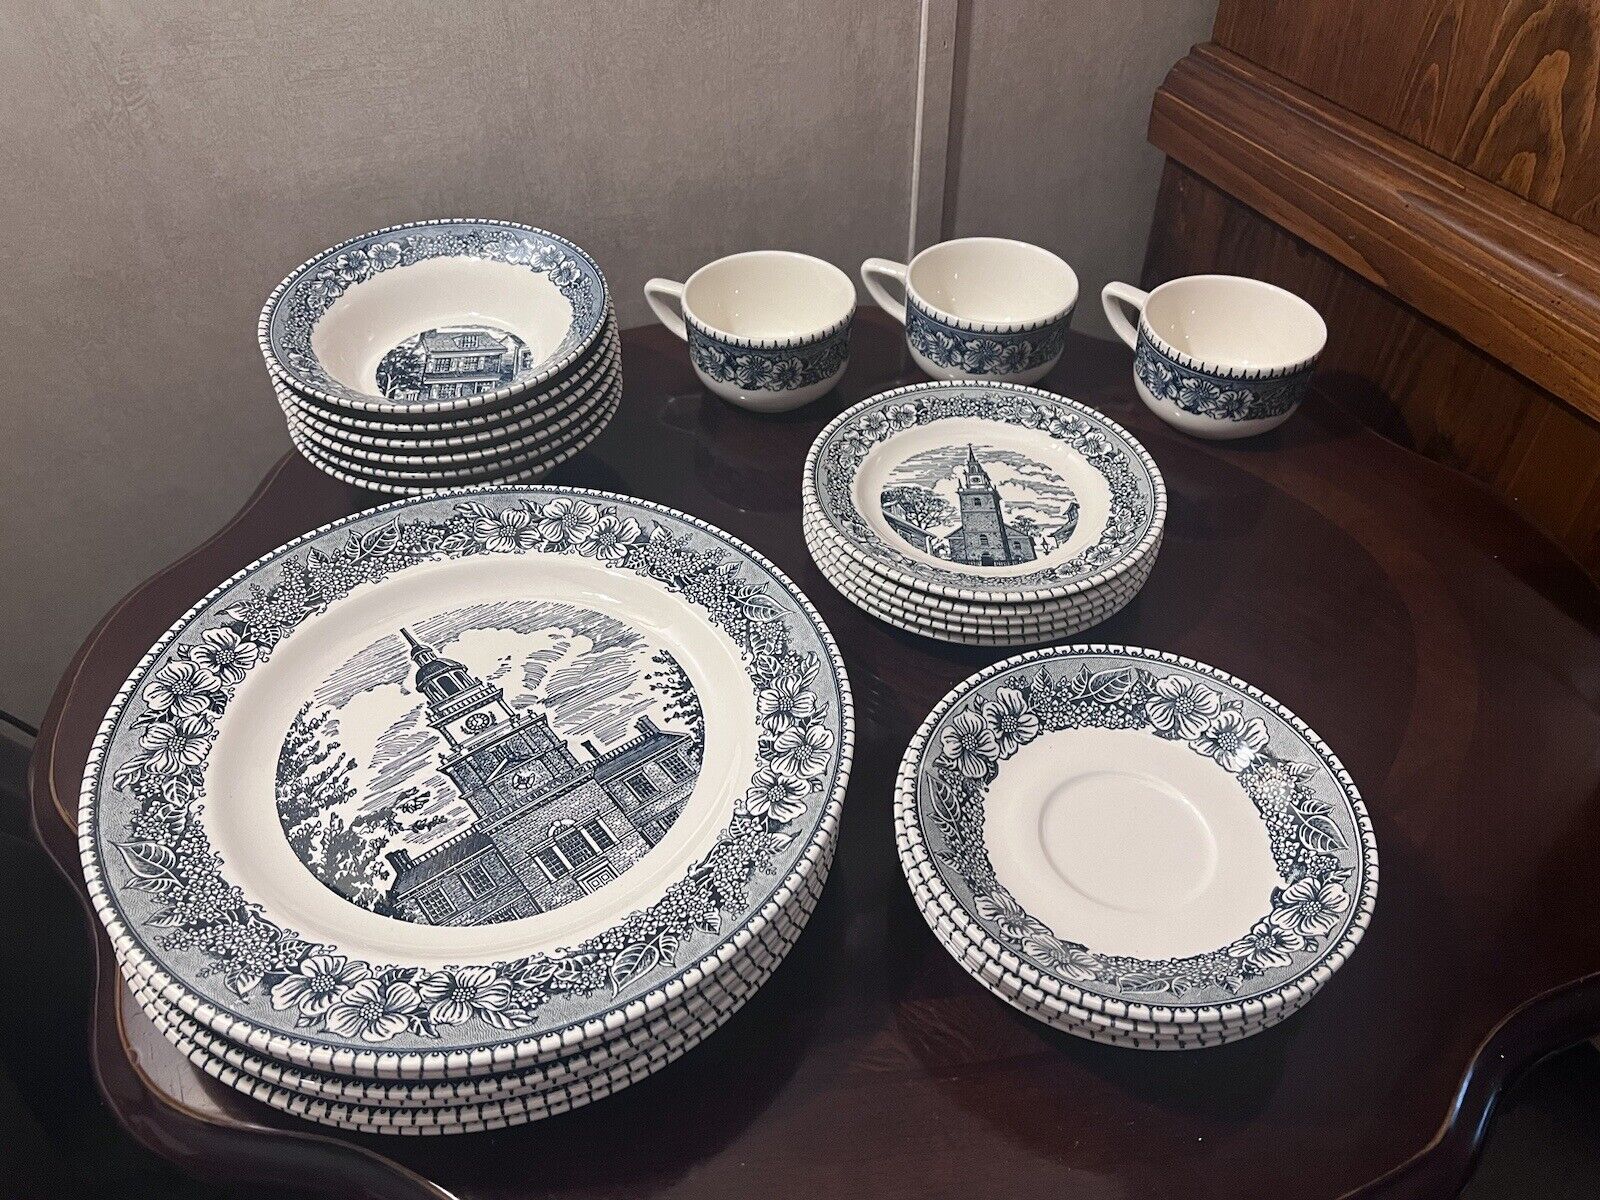 Vintage Cavalier Ironstone Heritage Pattern Set Of Dishes Plates, Bowls, Cups